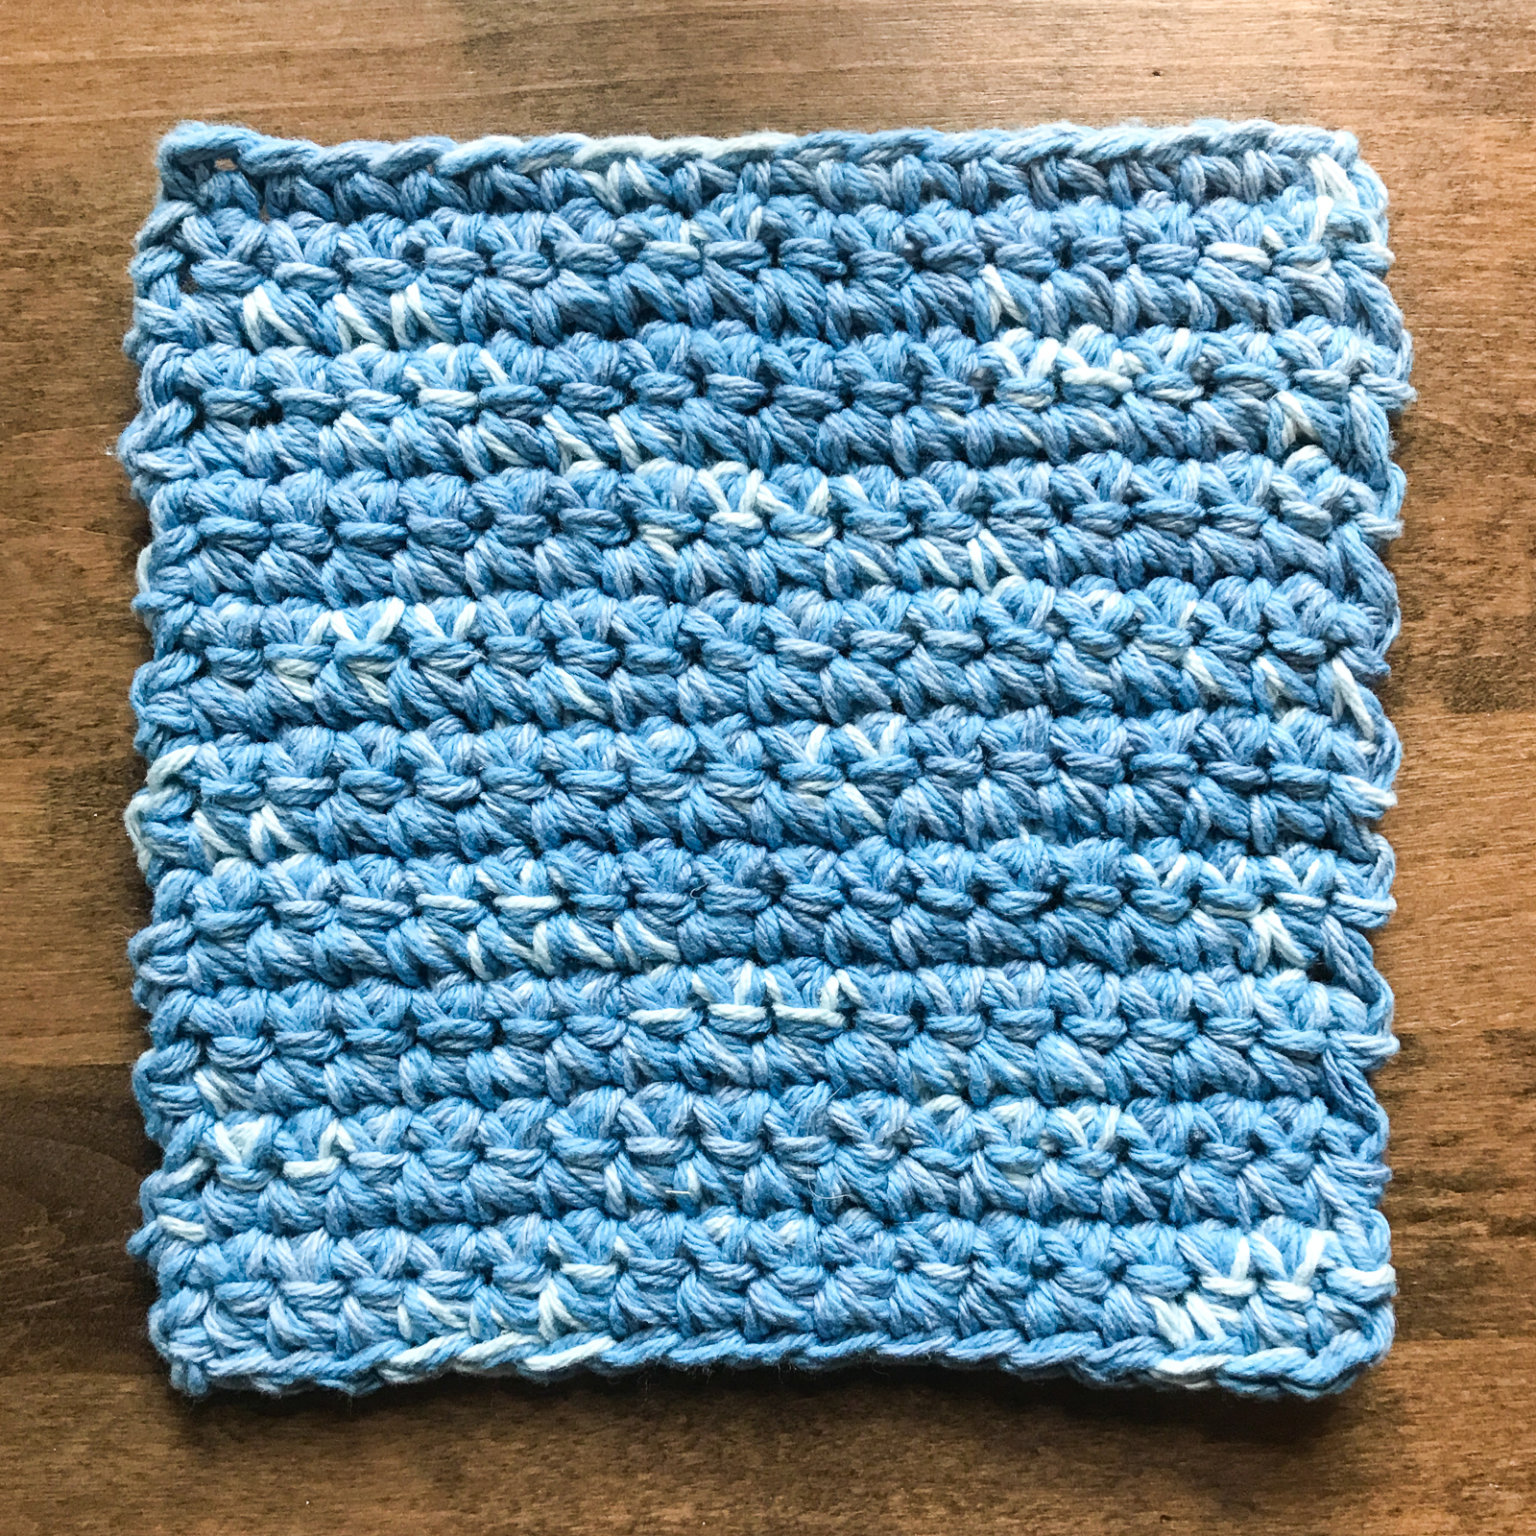 easy-crochet-hot-pads-worked-with-two-strands-of-yarn-petals-to-picots